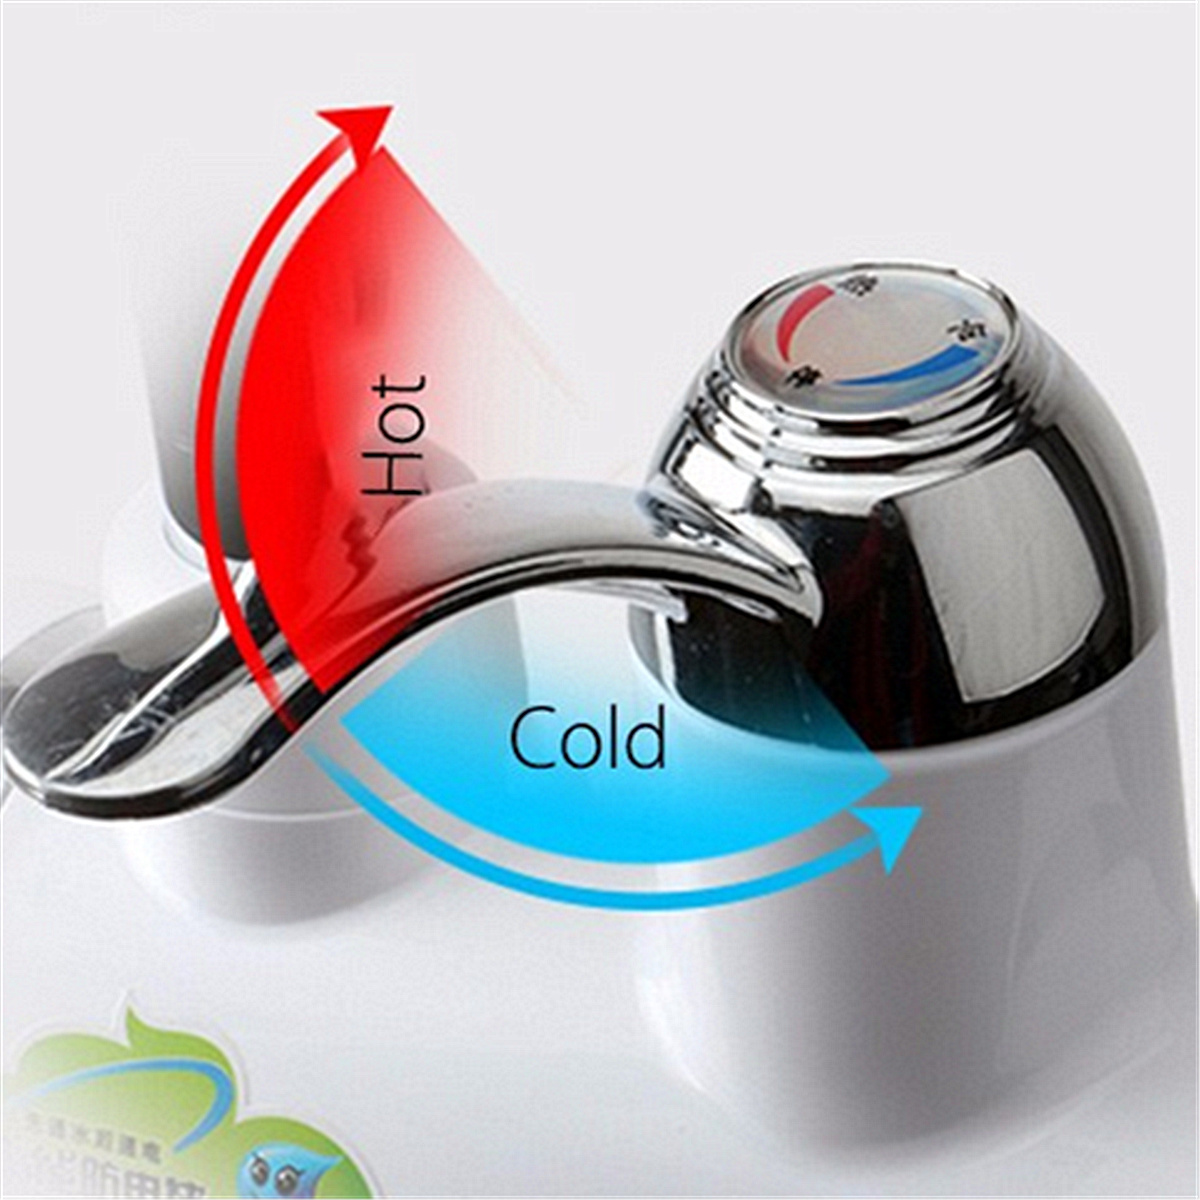 220V-Digital-Display-Instant-Heating-Electric-Water-Heater-Faucet-Tap-1151311